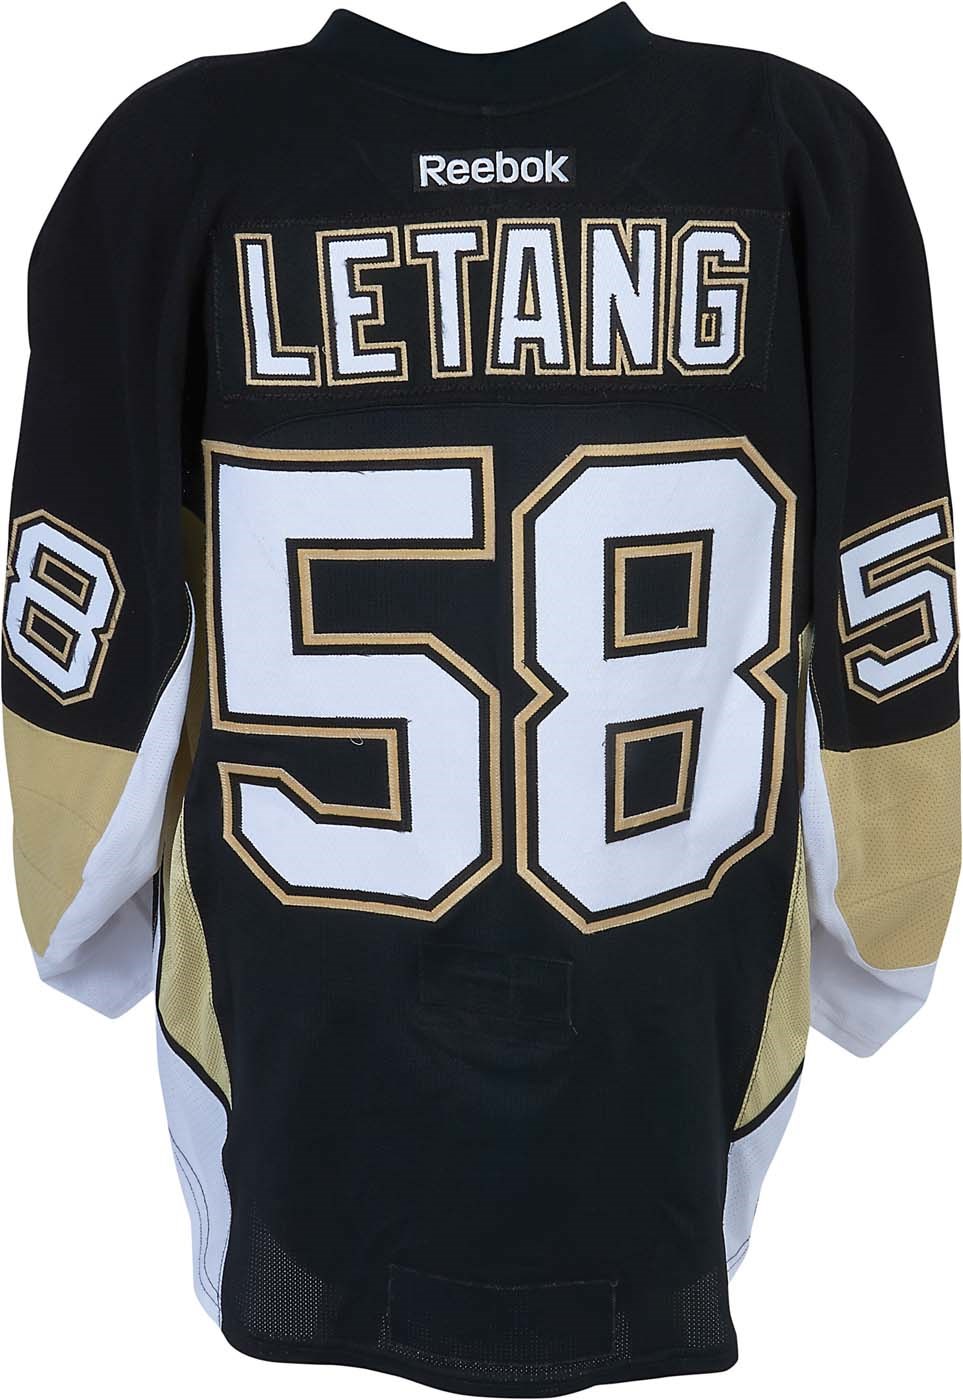 Hockey - 2015-16 Kris Letang Game Worn Pittsburgh Penguins Jersey - Worn in 14 Games (Penguins LOA & Photo-Matched)